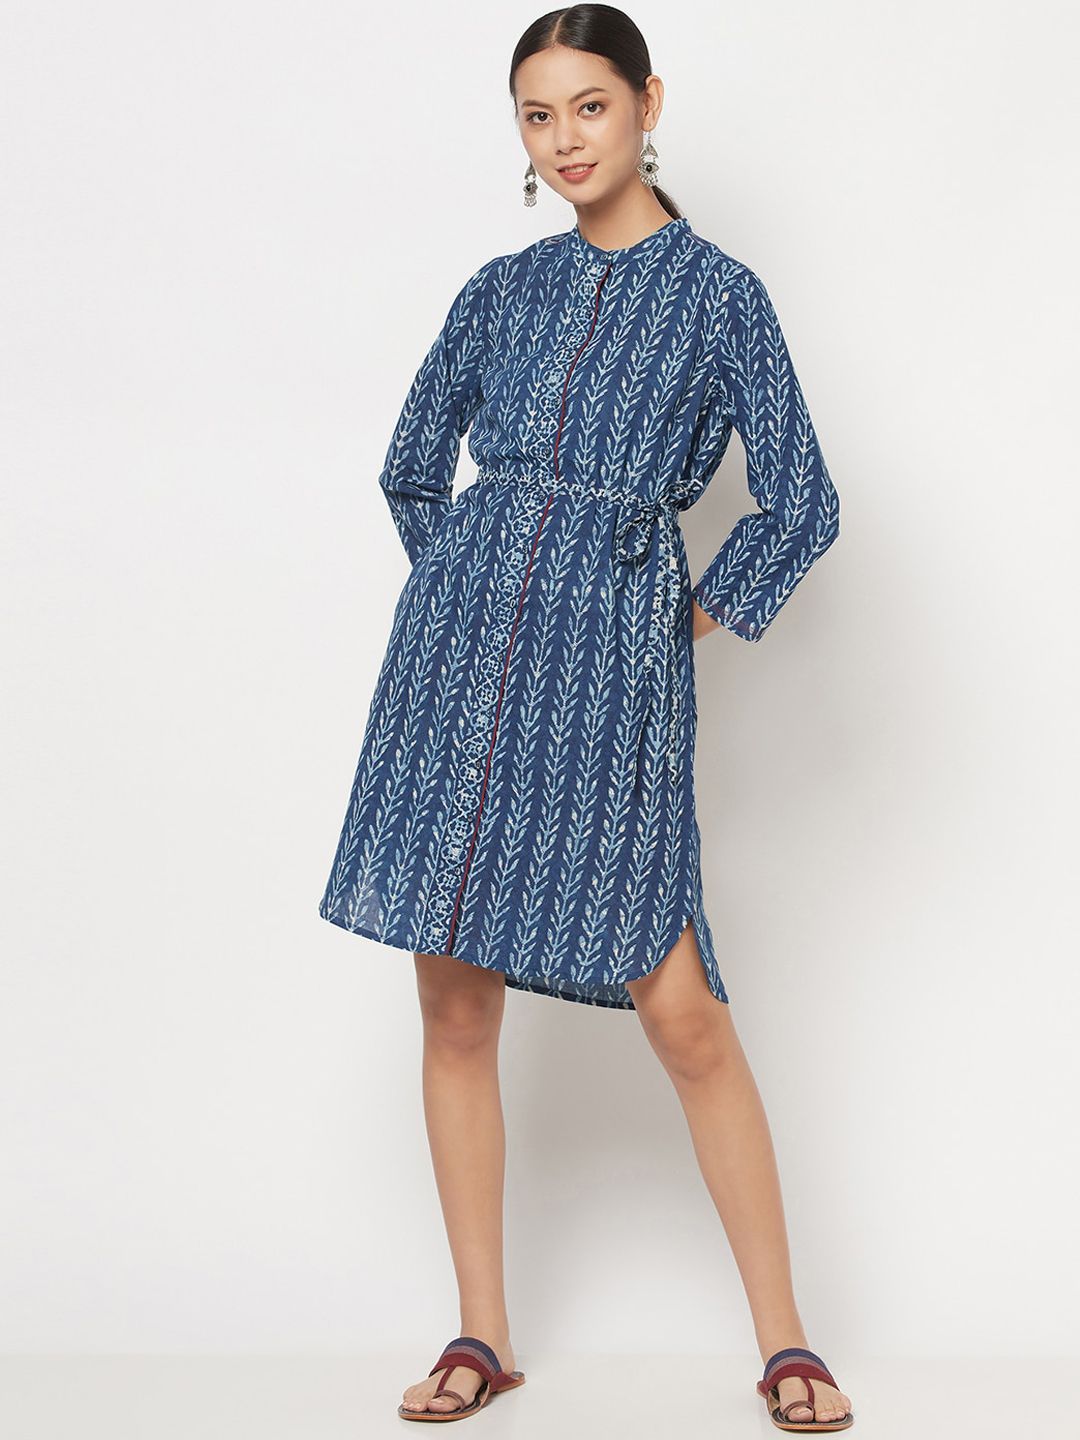 Fabindia Blue A-Line Dress Price in India